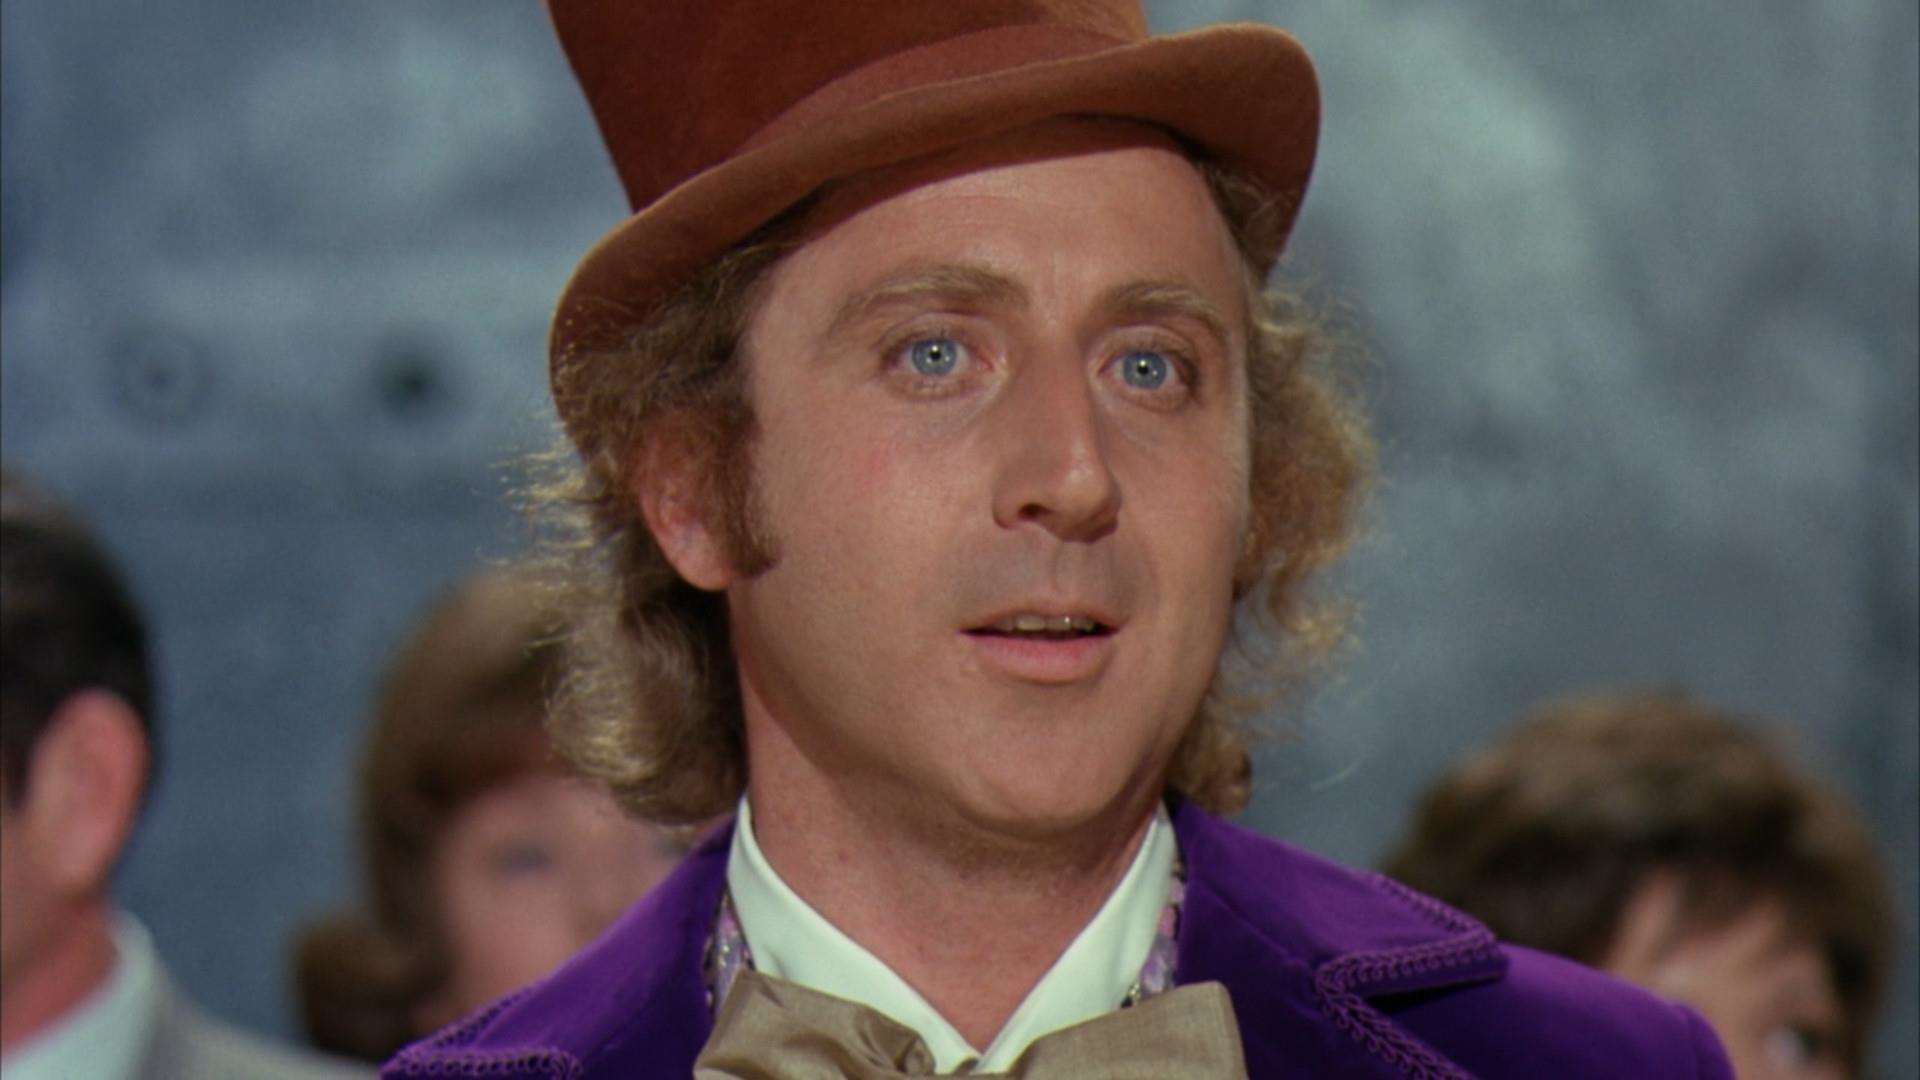 Gene Wilder as Willy Wonka. Picture credit: Paramount Pictures